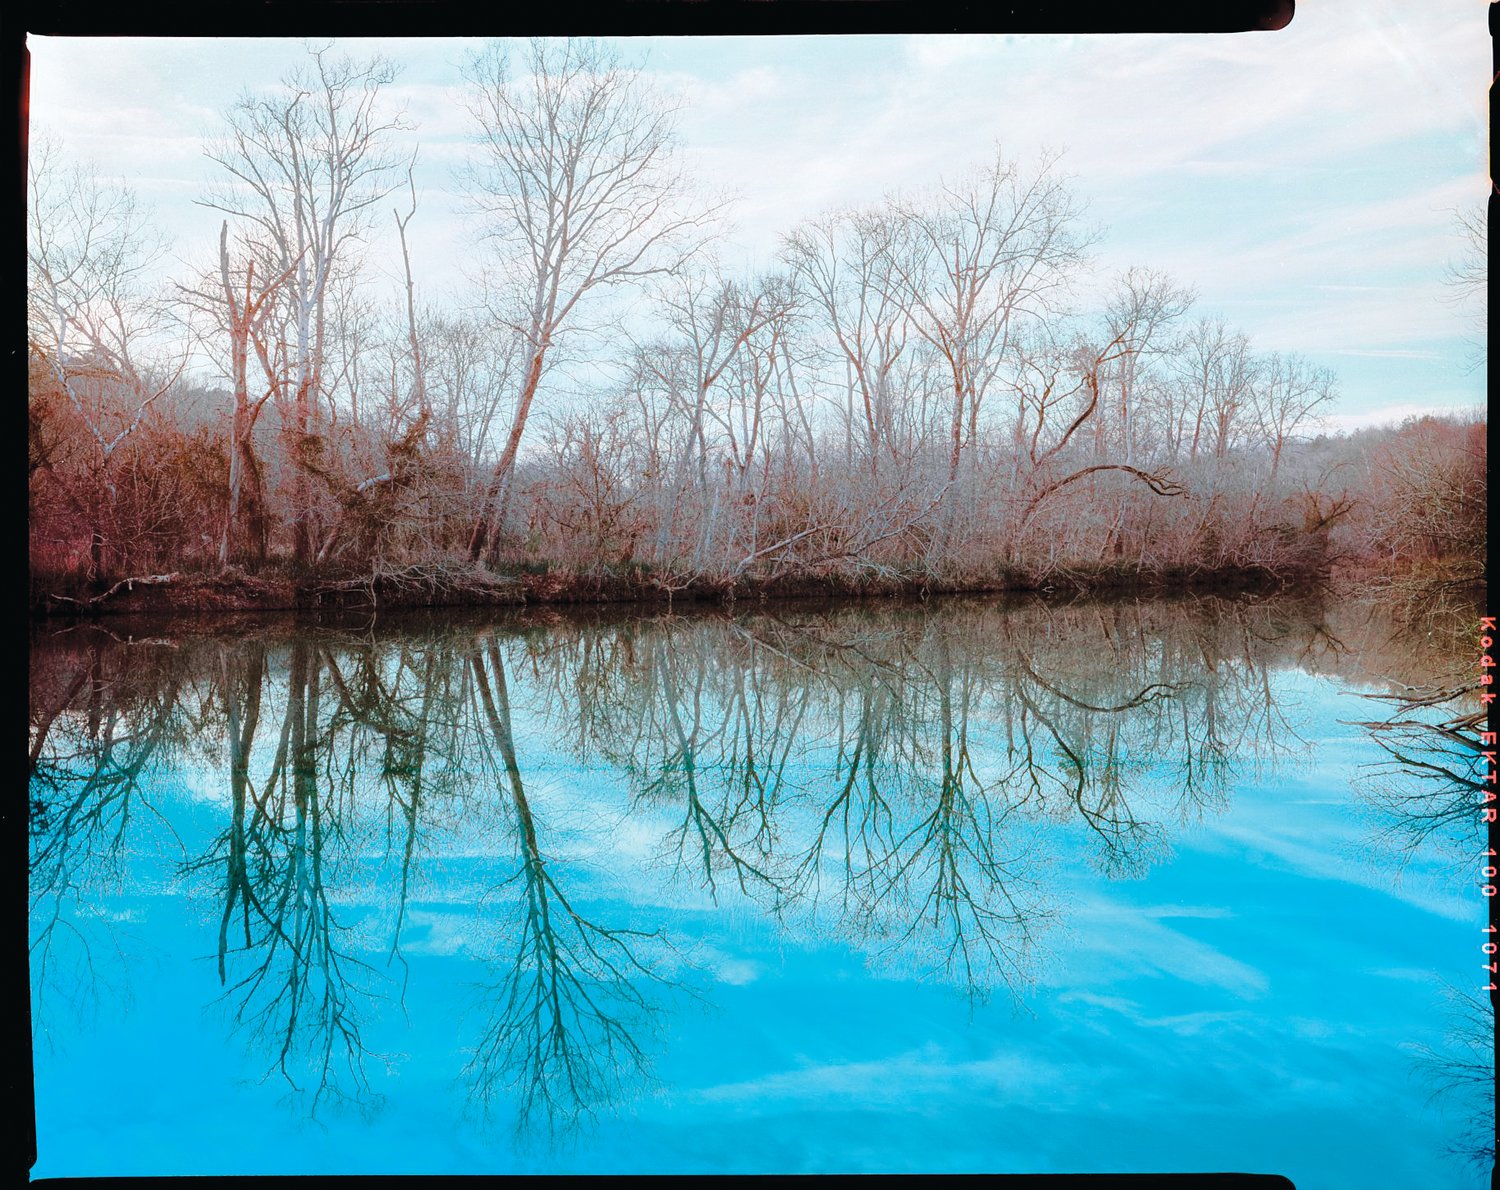 Environmental advocates say the Haw River is an important natural resource for Chatham County to invest in. Pictured here is reflection of trees on the river, taken the winter of 2020.